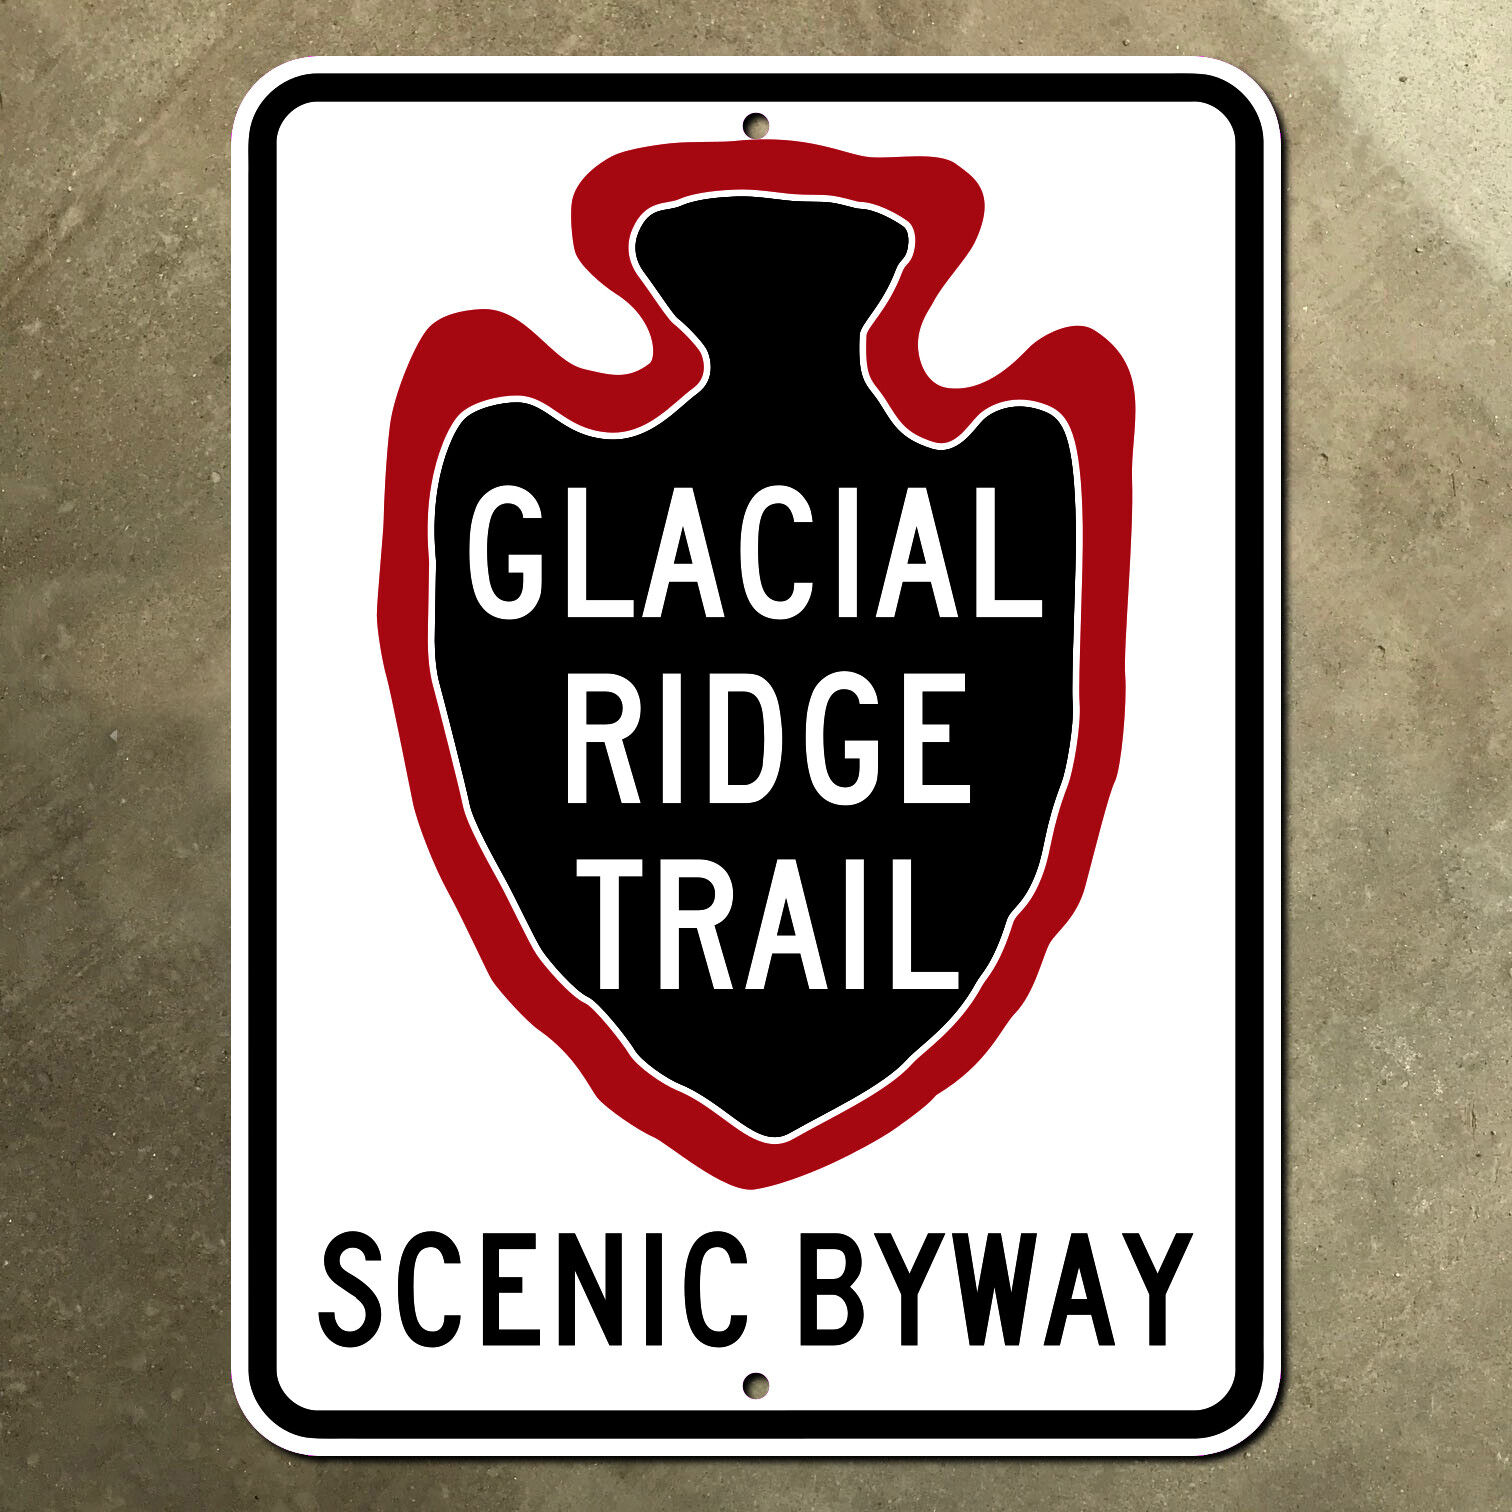 Minnesota Glacial Ridge Trail route marker highway road sign 1990s scenic 18x24